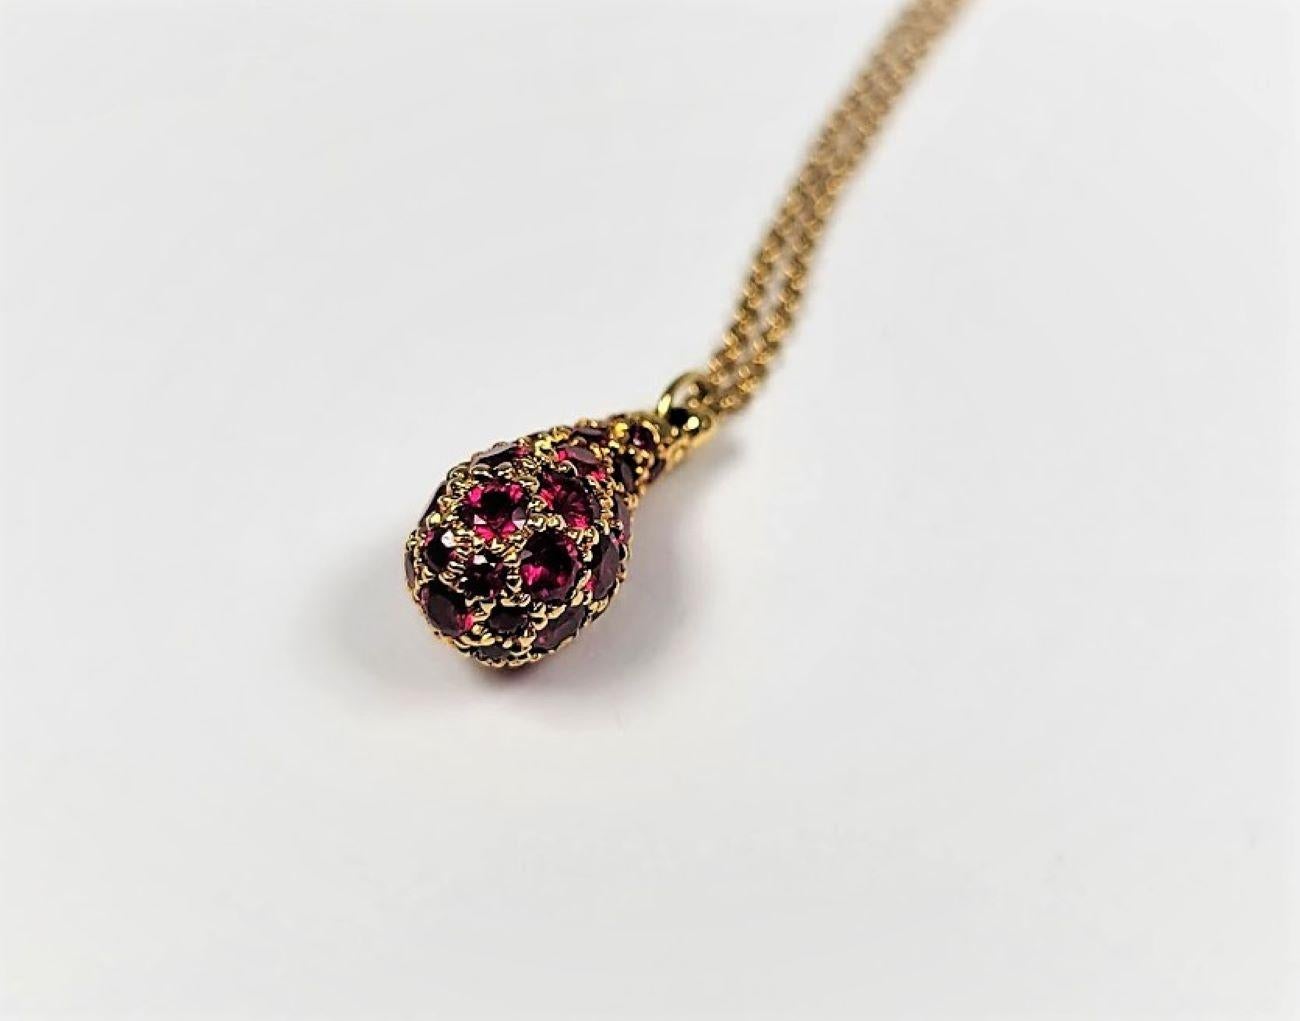 This beautiful pave set ruby pendant necklace is in 18 karat gold and is from the Concepts Collection by Elsa Peretti for Tiffany & Co.